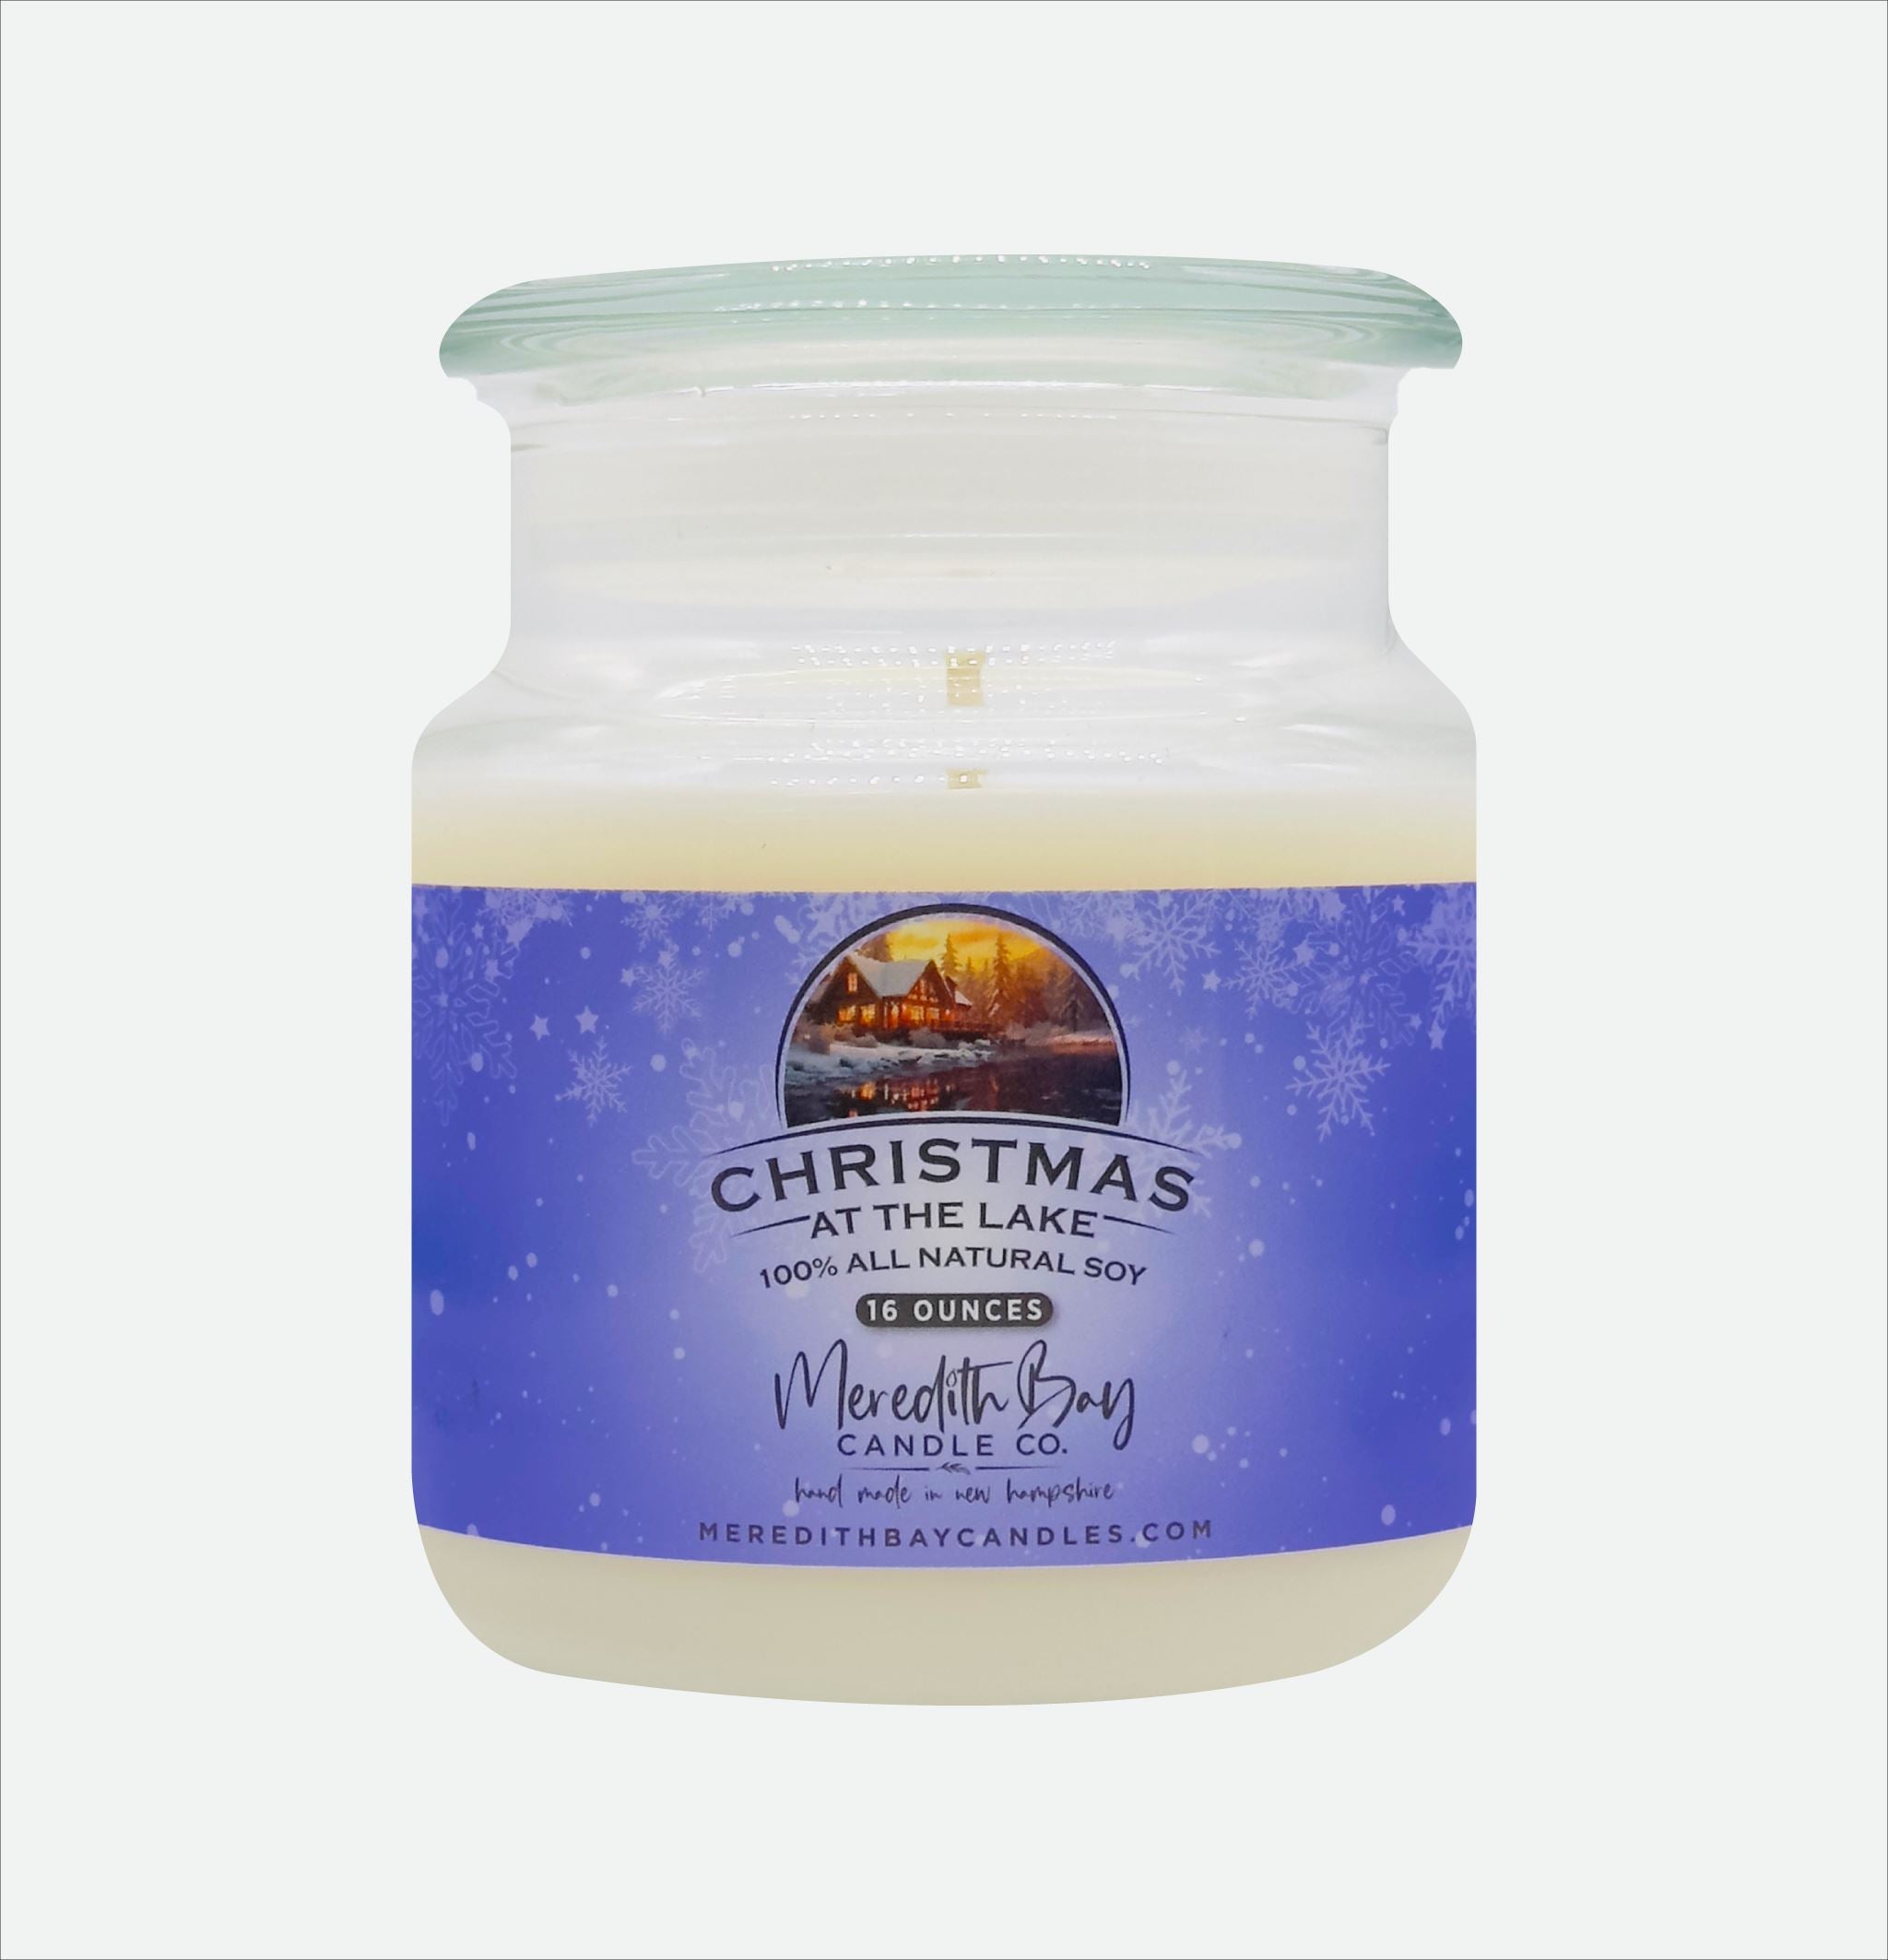 Christmas At The Lake Soy Candle Meredith Bay Candle Co 16 Oz 